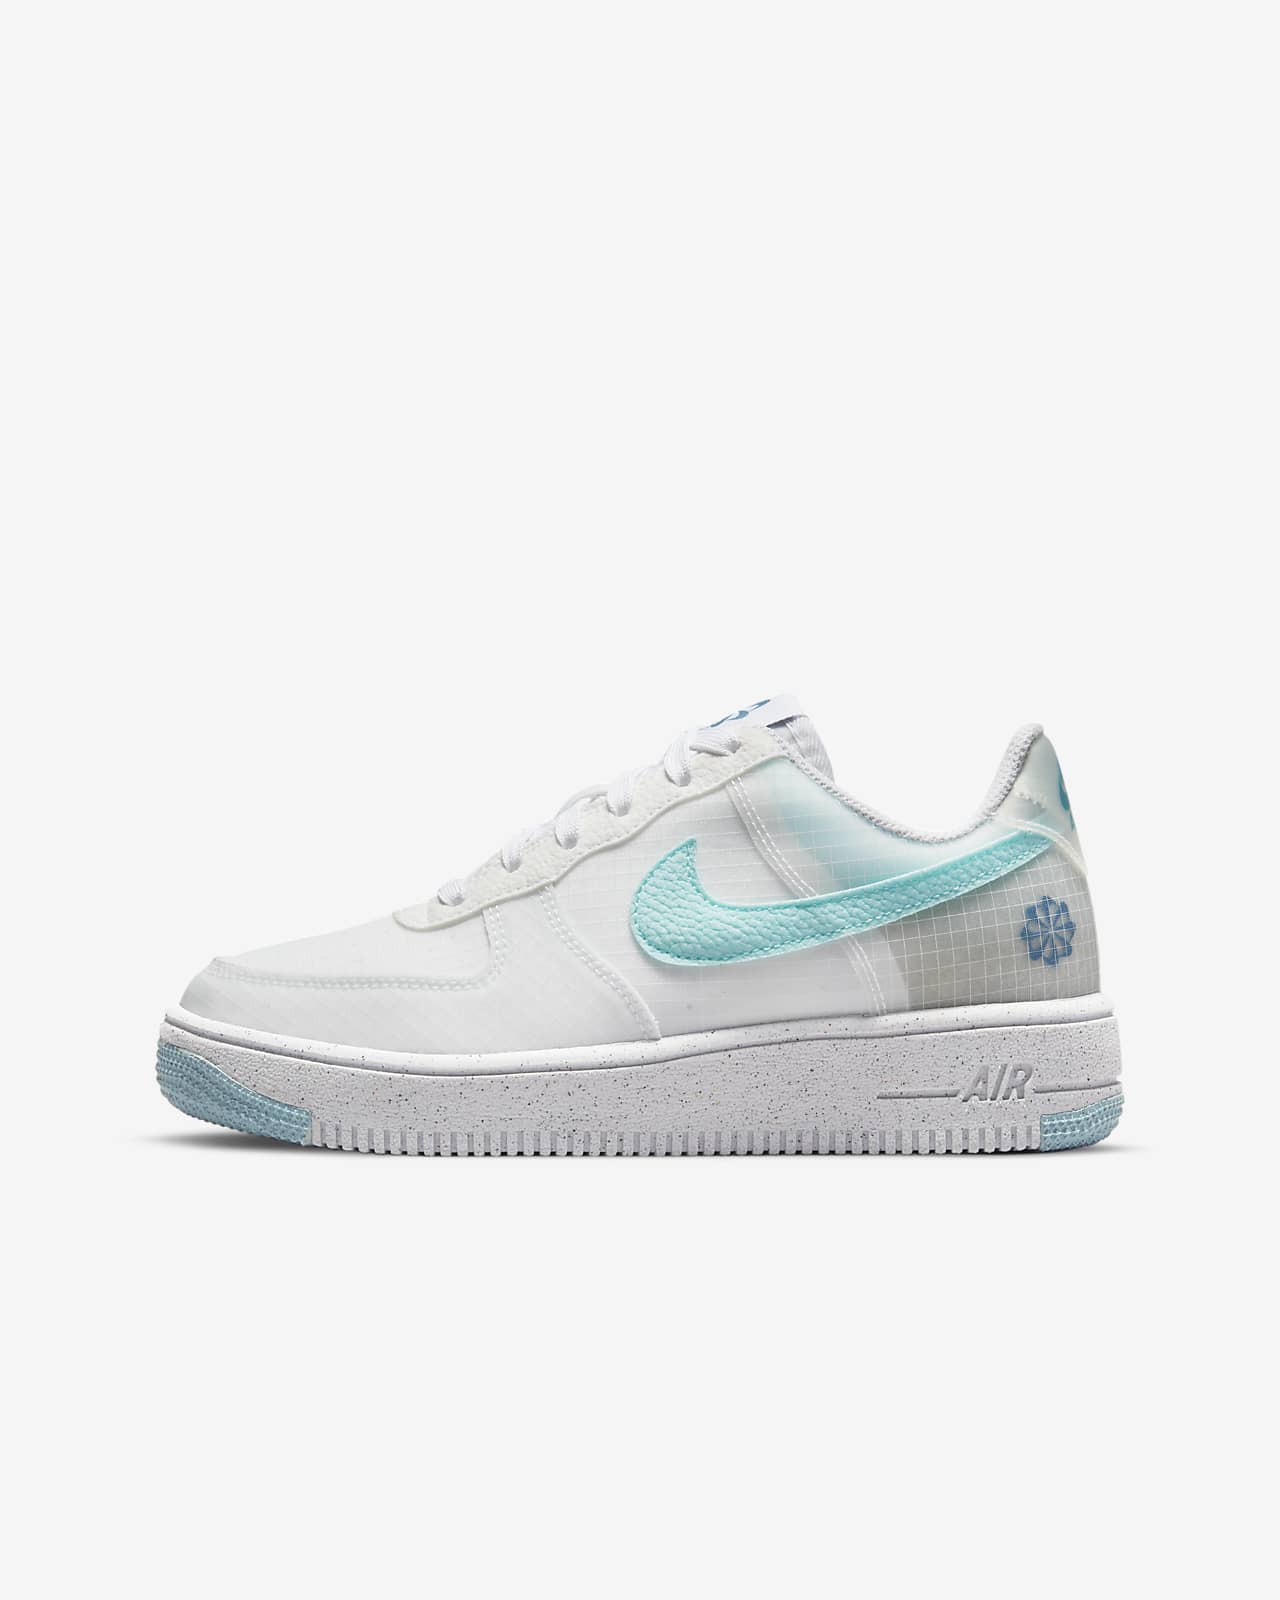 Scarpe Nike Air Force 1 Crater - Ragazzi فزاعة الطيور